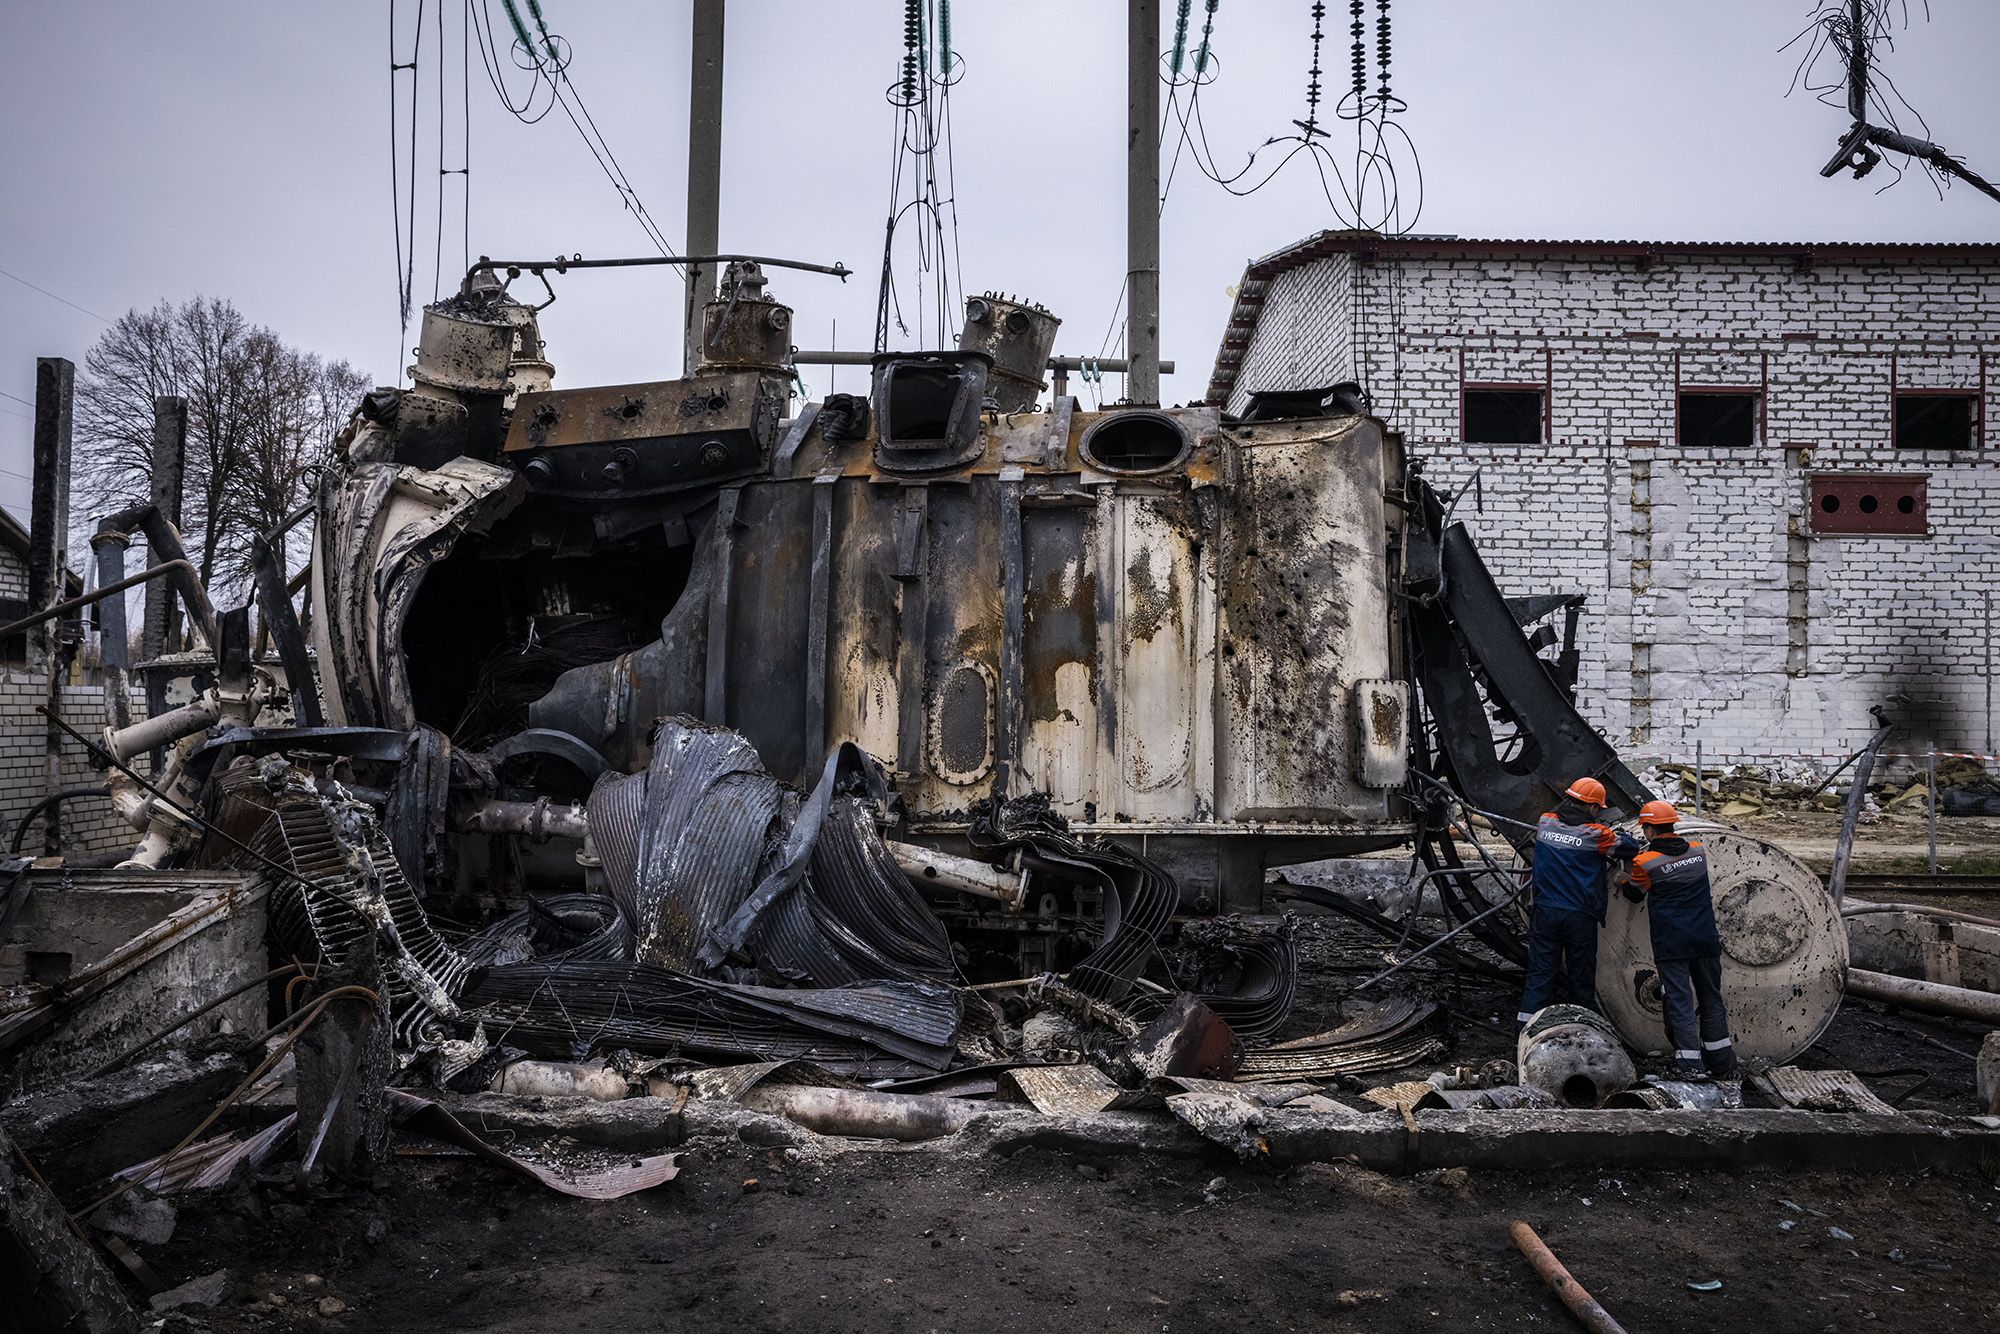 Workers dismantle an autotransformer in central Ukraine which stands completely destroyed after the Ukrenergo high voltage power substation was hit by a missile strike on October 17.